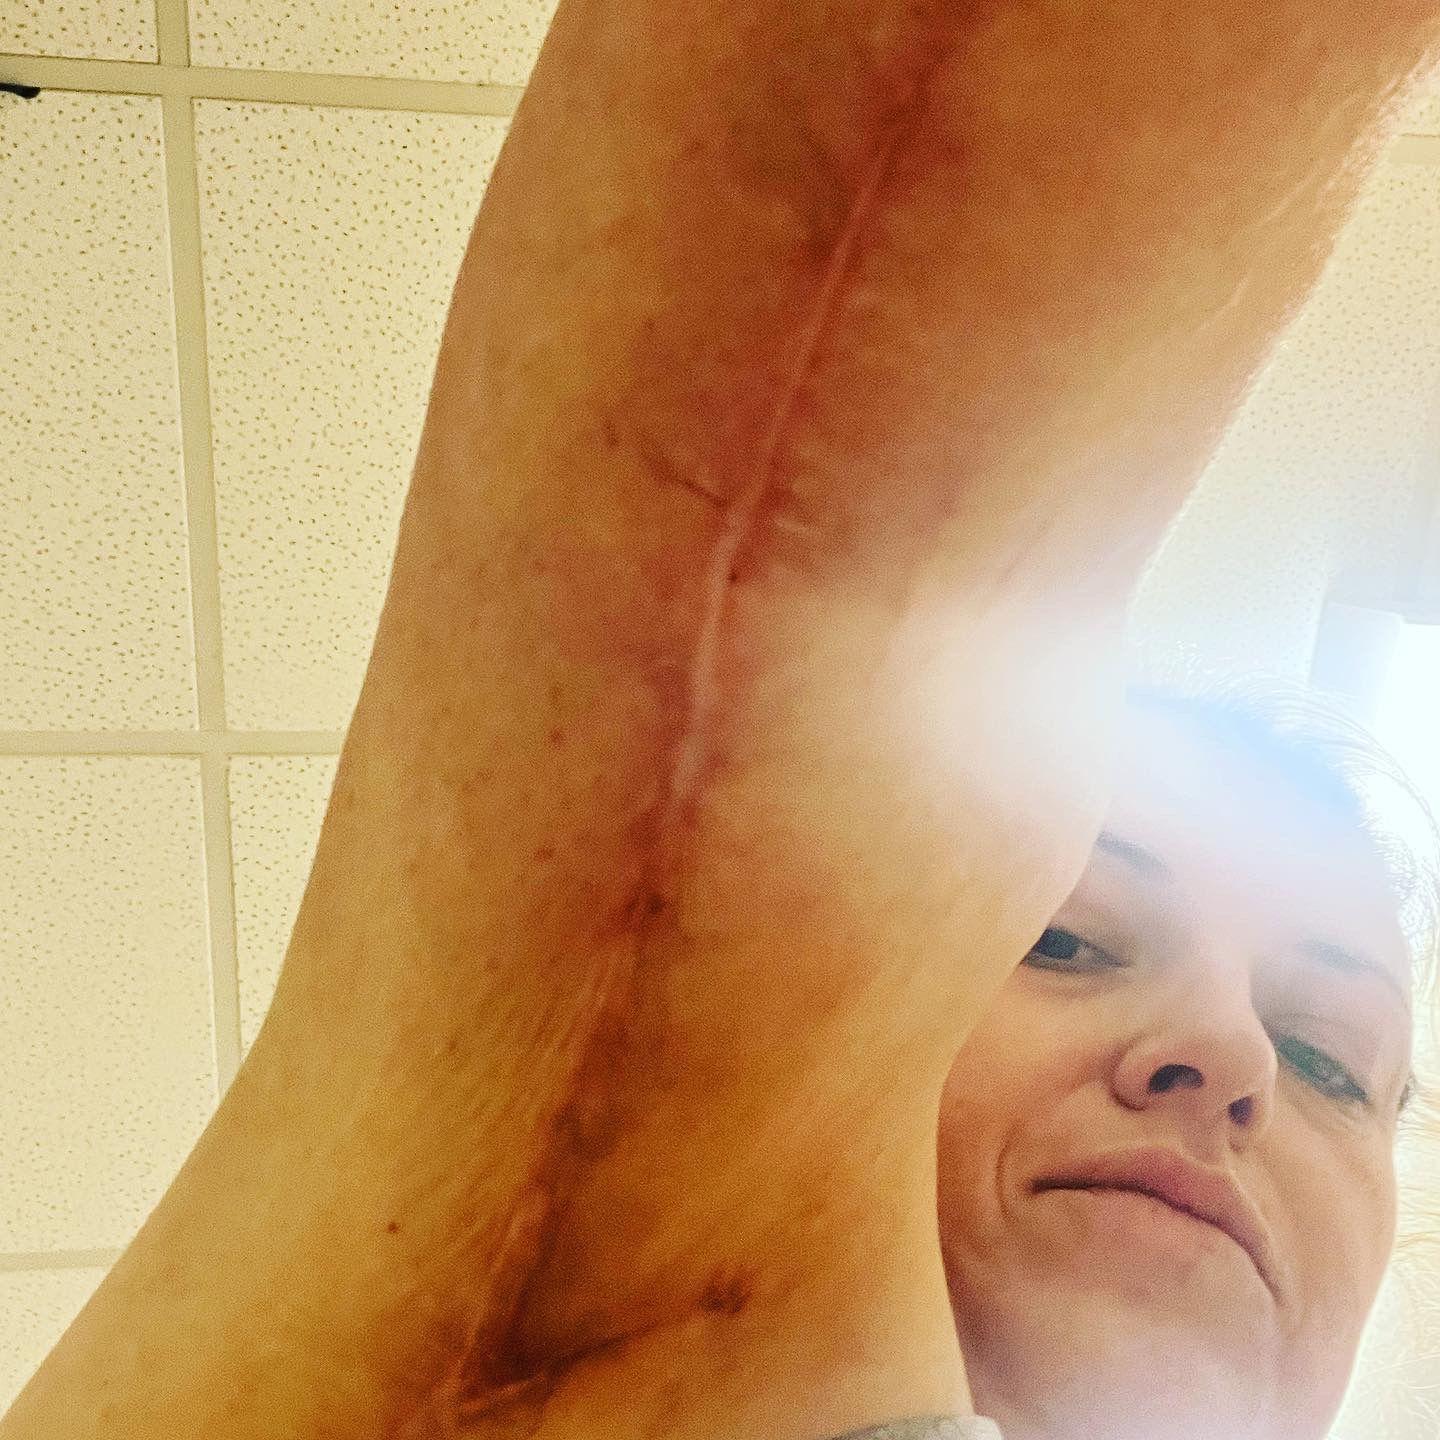 Sarah Platt shows off scarring from botched surgery in Turkey